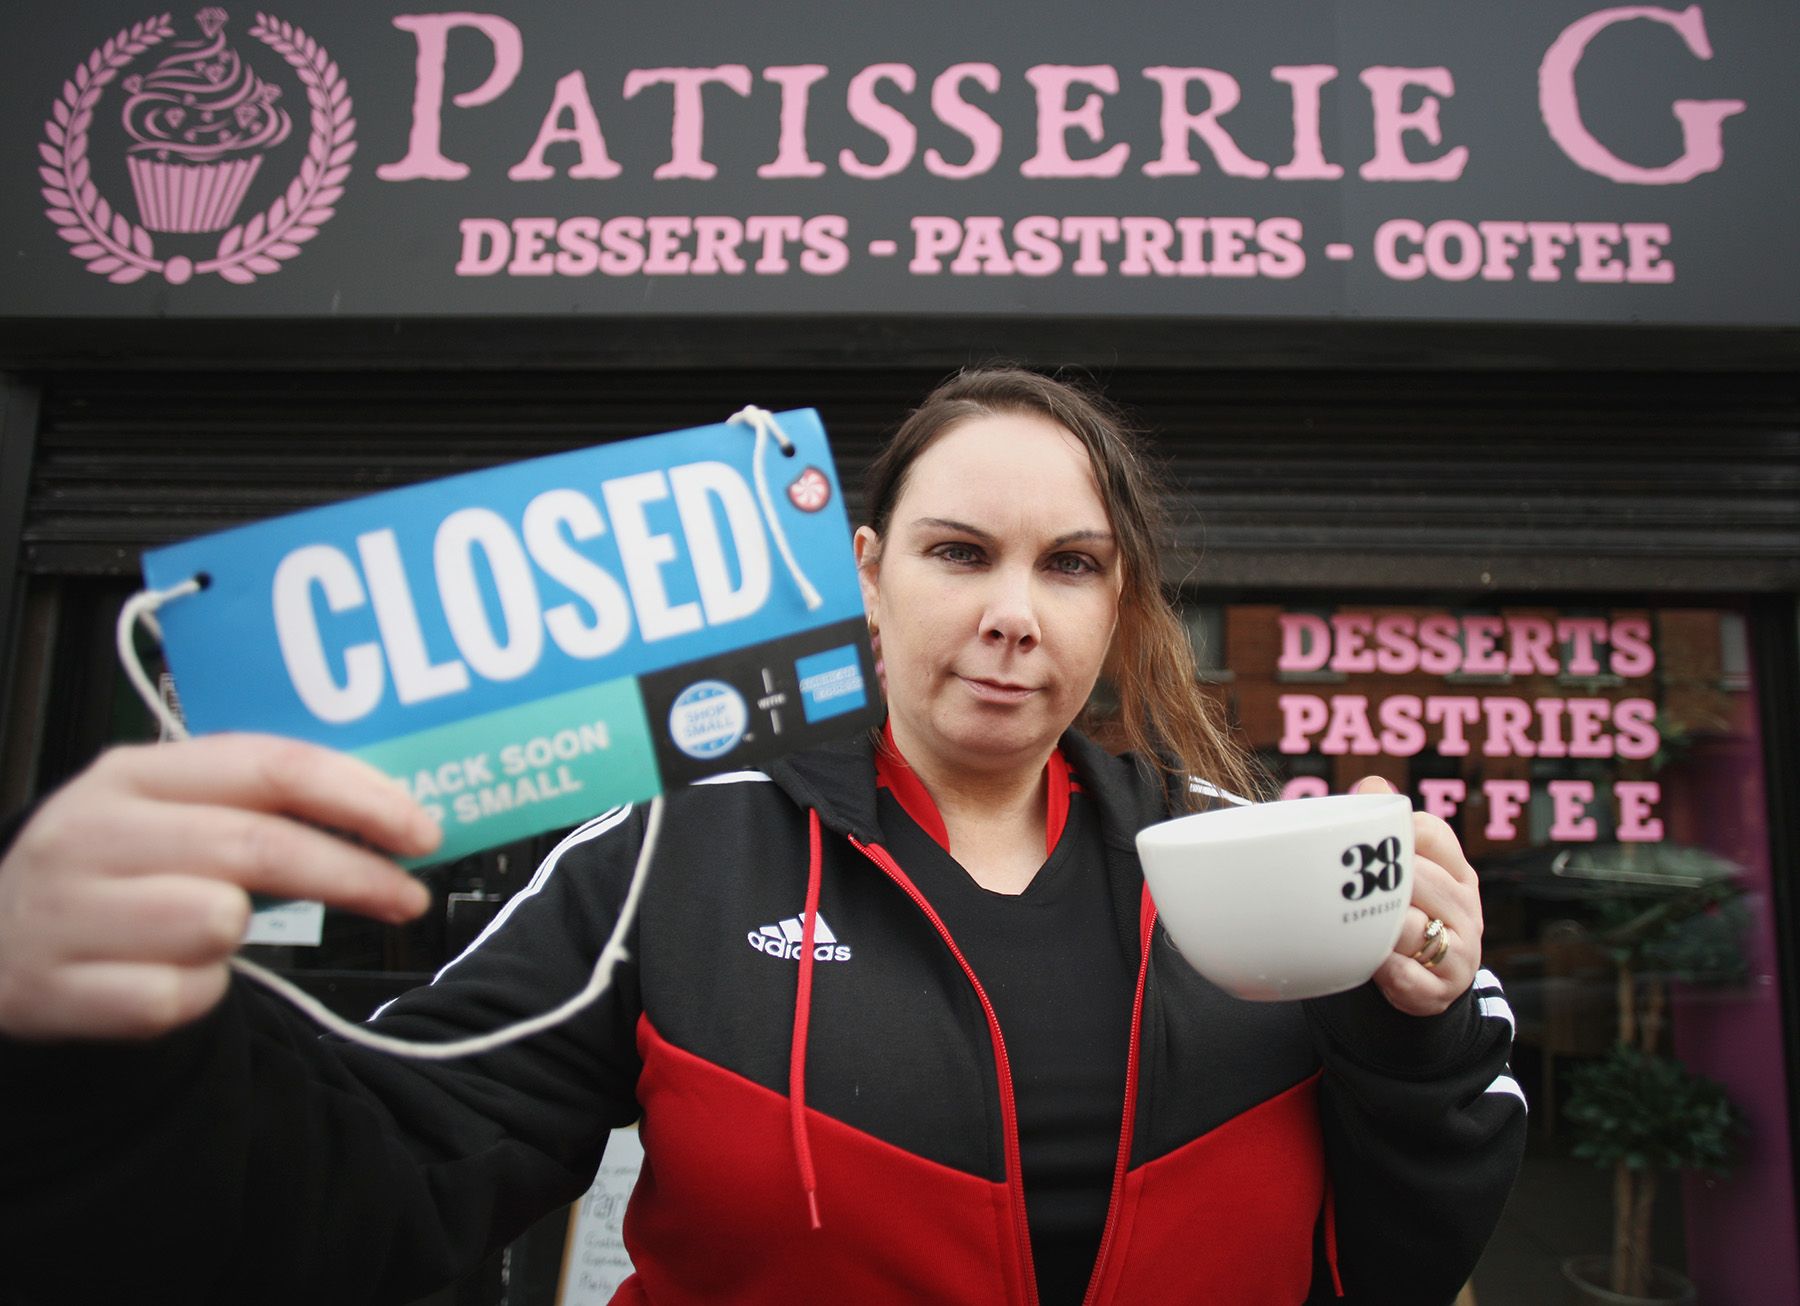 SIGN OF THE TIMES: Gráinne Carson, owner of Patisserie G bakery